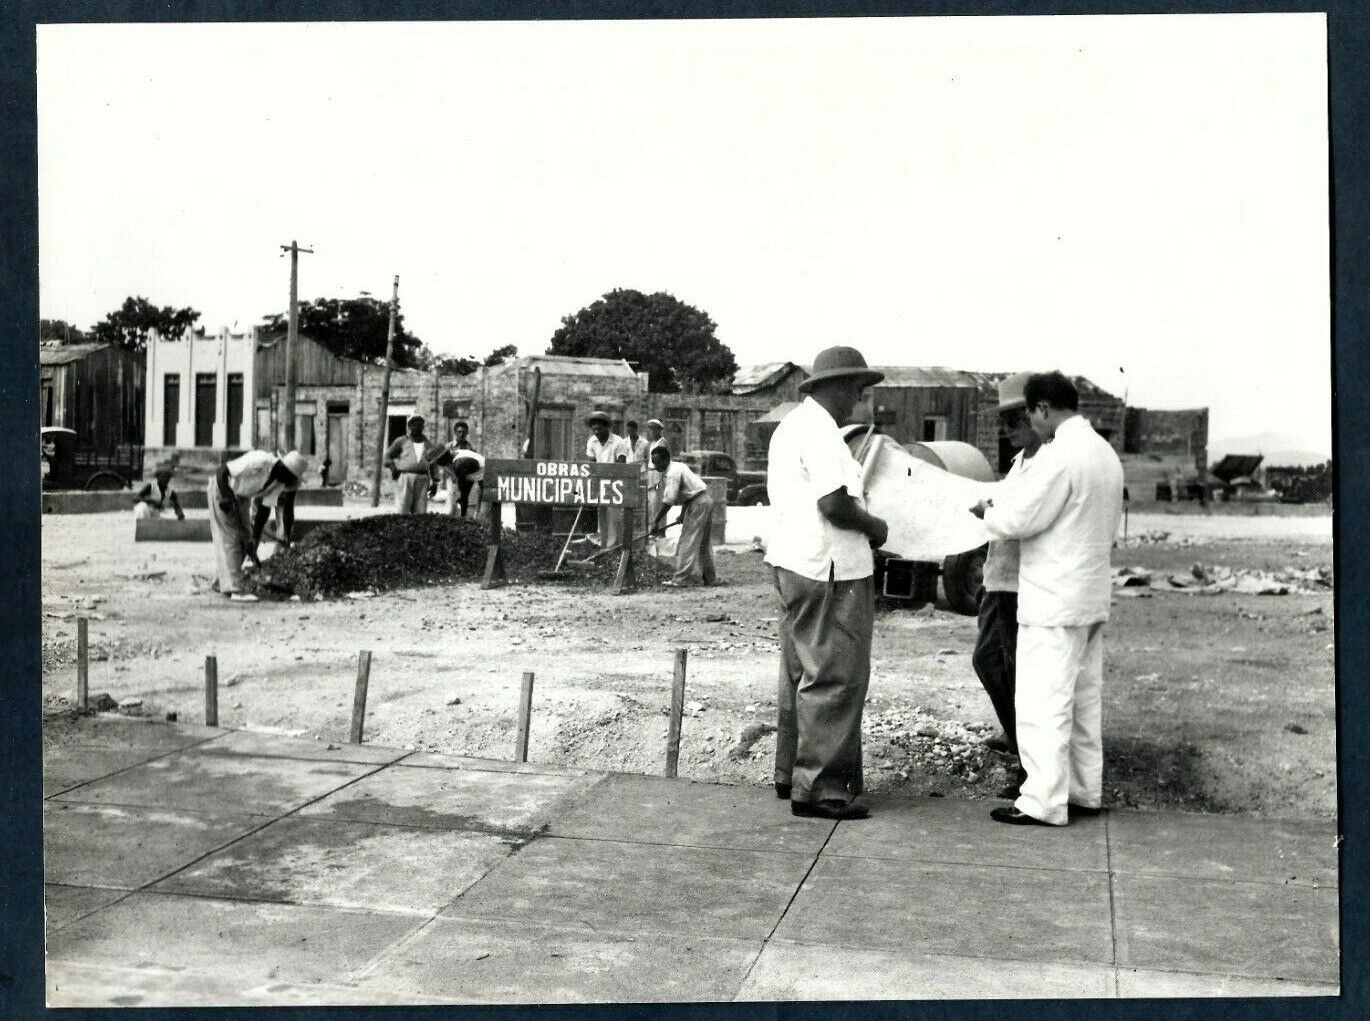 PLANNERS ARCHITECTS & WORKING FORCE EASTERN CUBA PUBLIC WORKS 1940s Photo Y 195